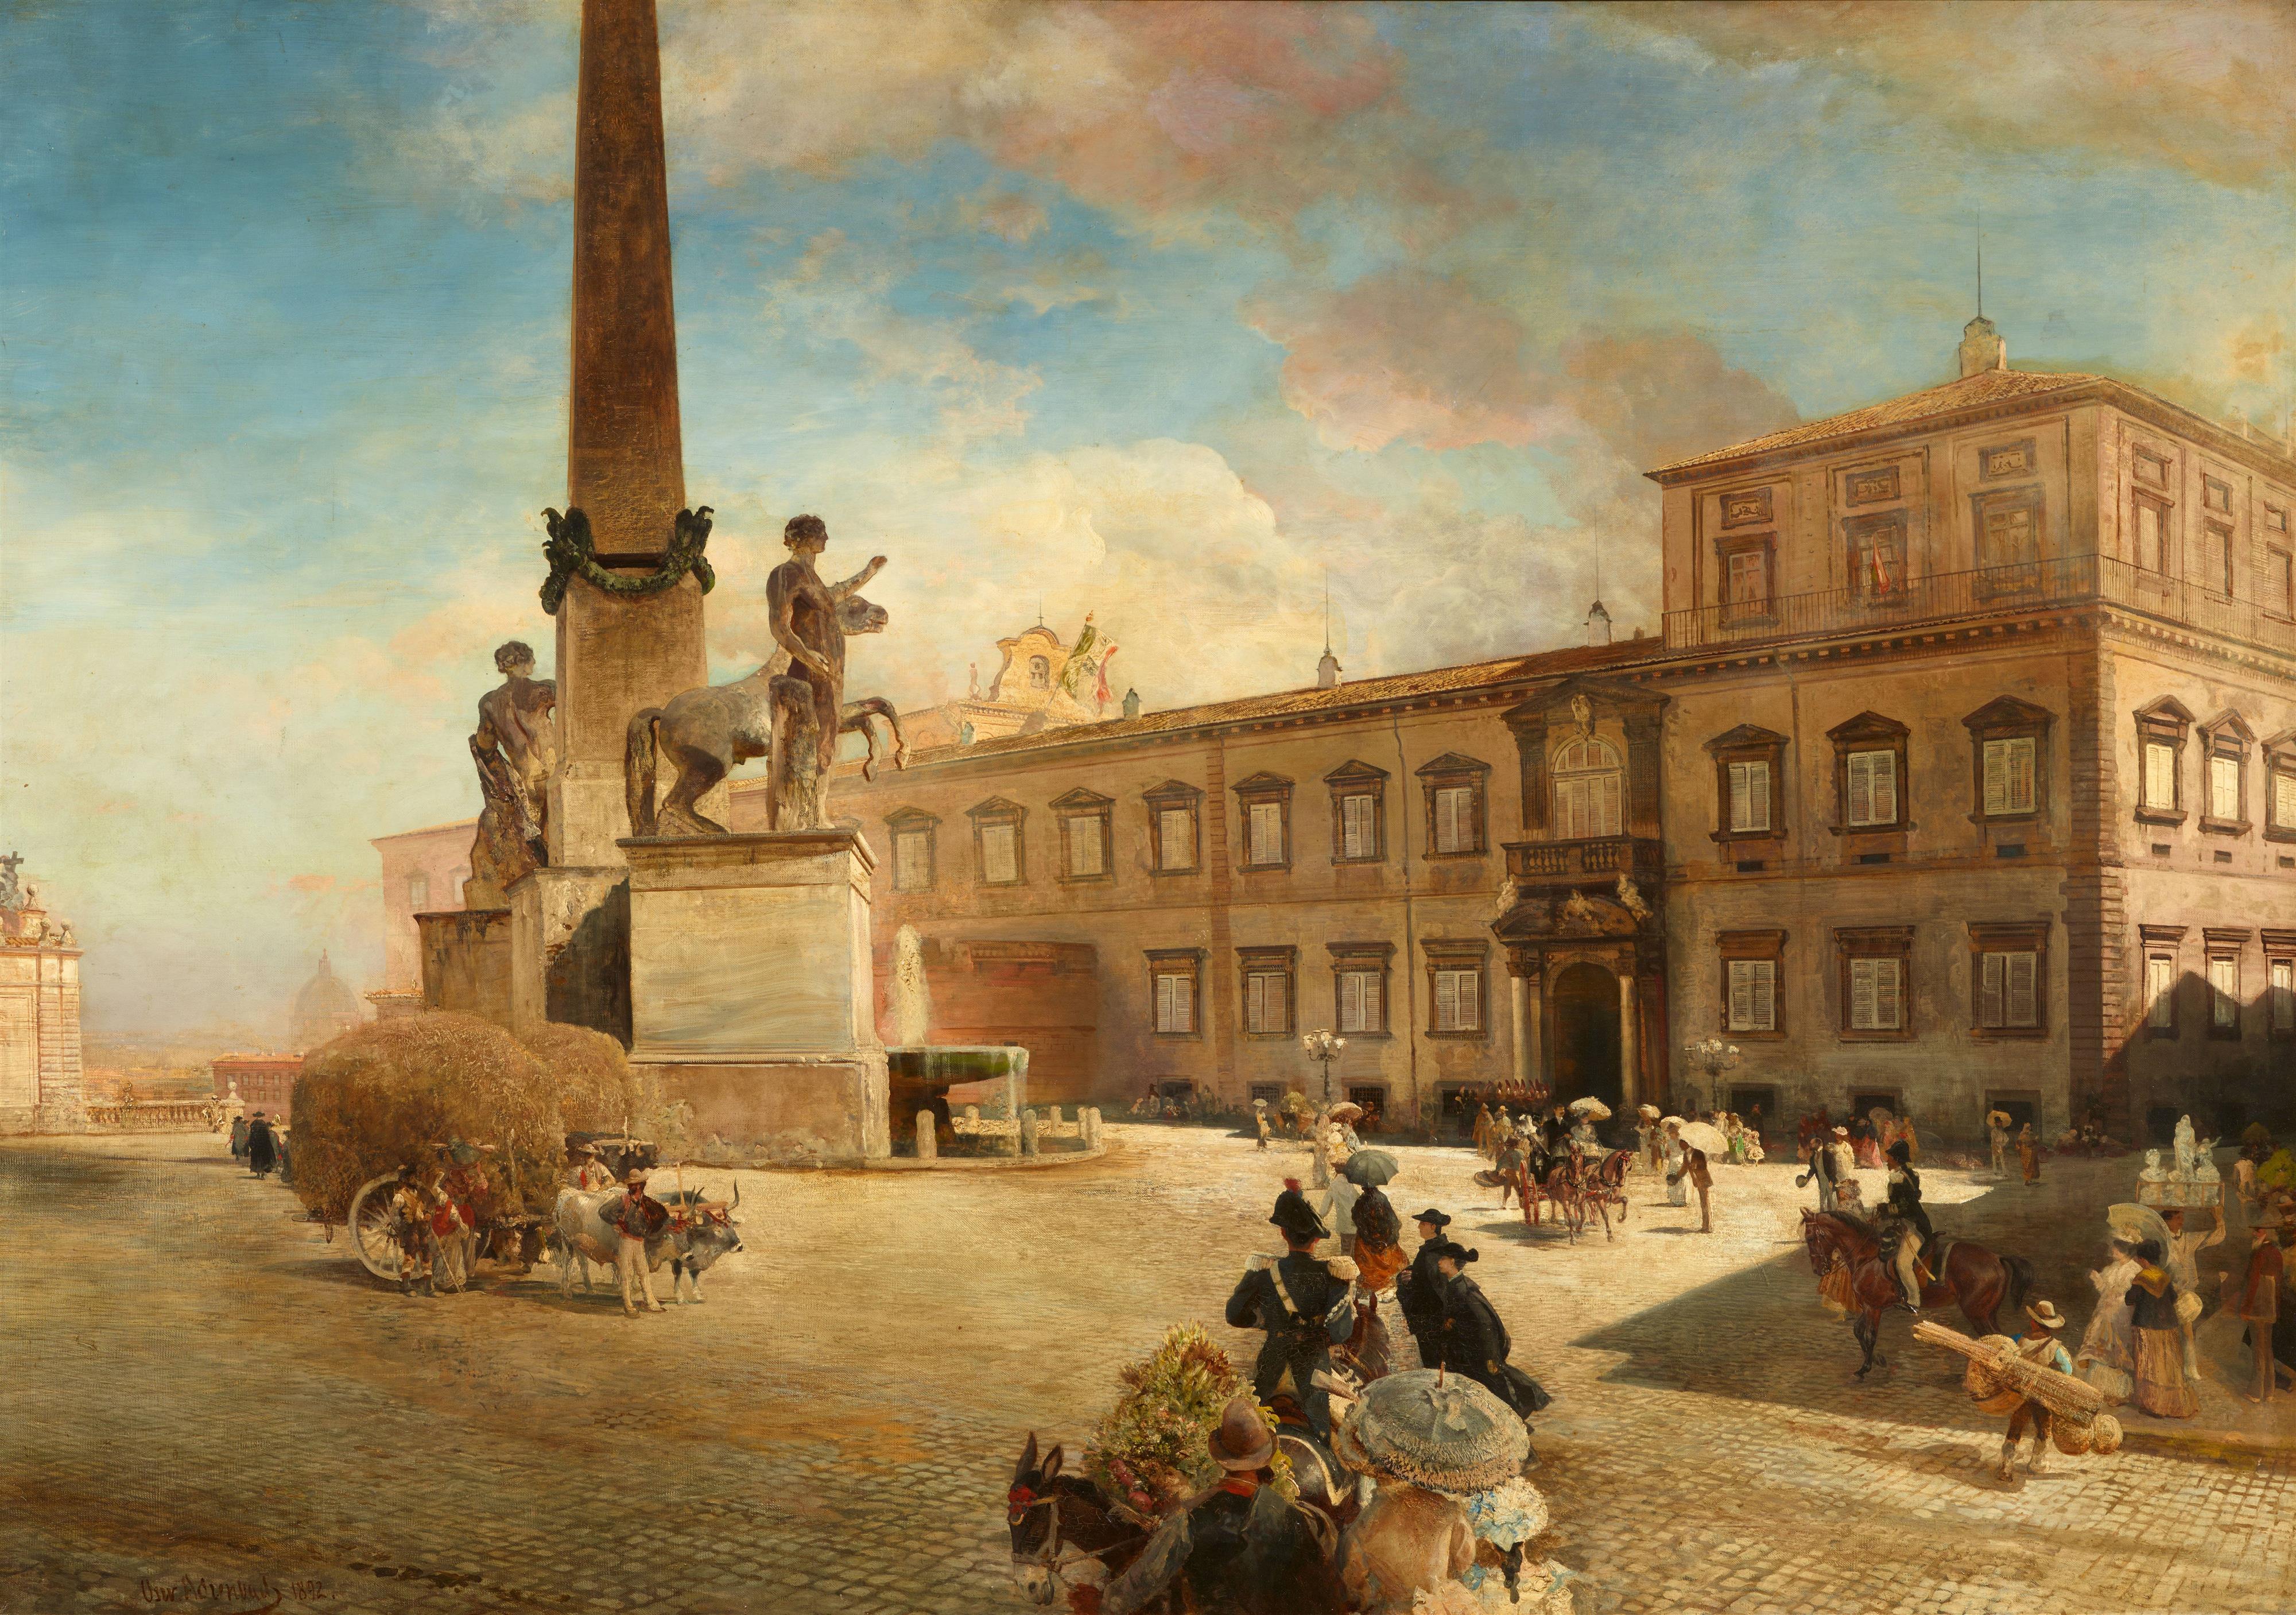 Oswald Achenbach - The Quirinal Palace in Rome - image-1